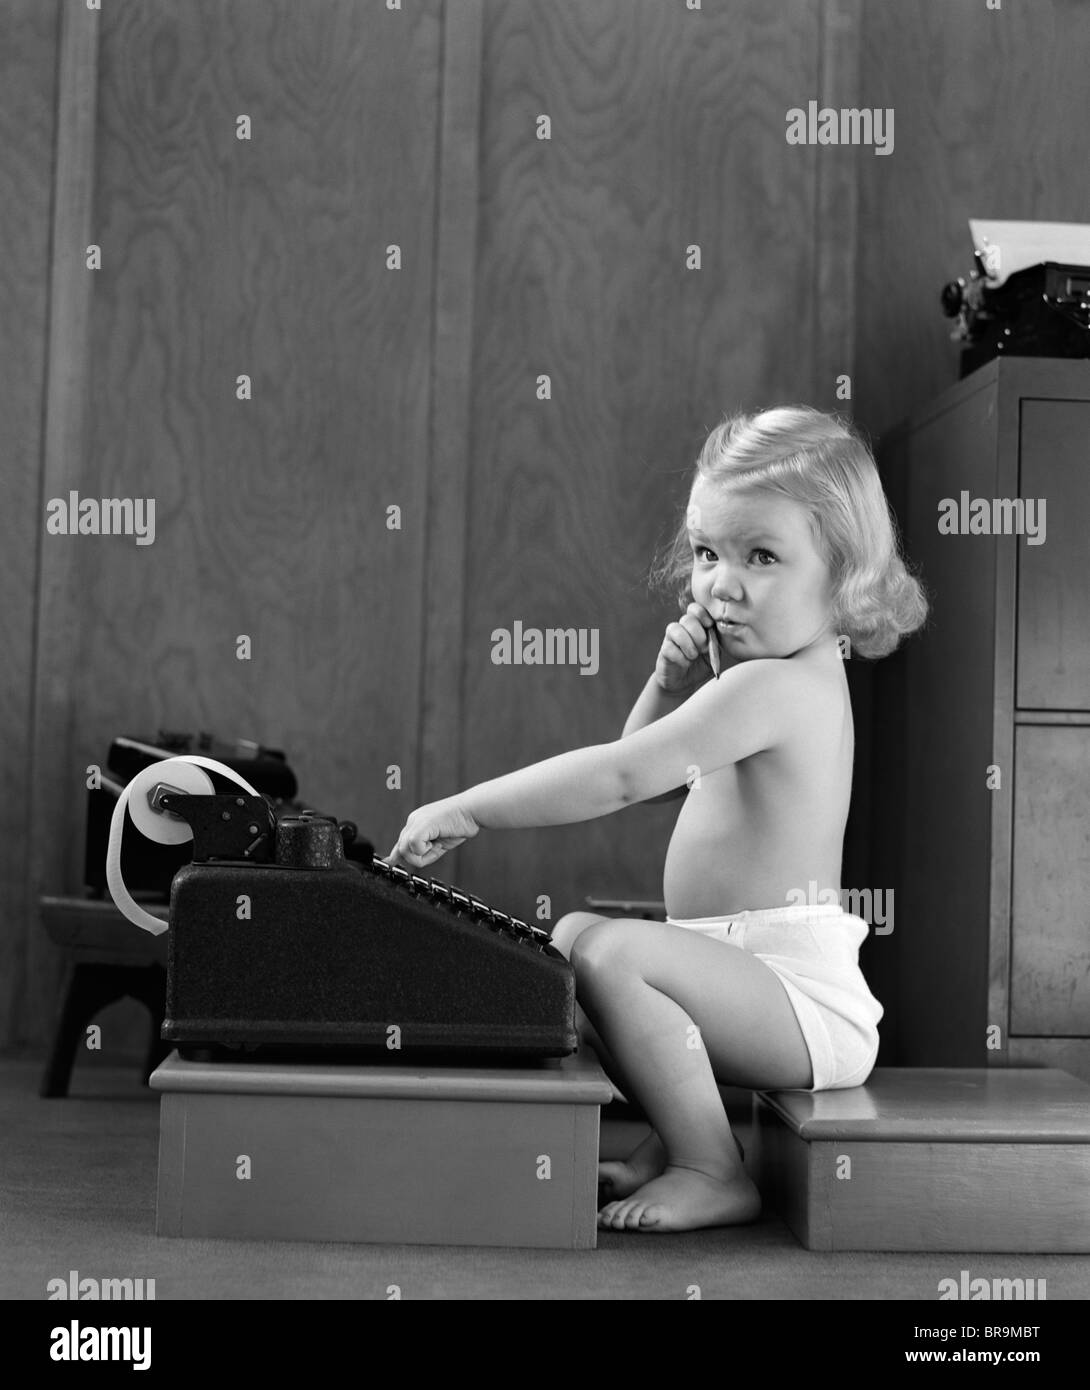 1940s CHILD SITTING TYPING ON ADDING MACHINE FUNNY FACIAL EXPRESSION Stock Photo